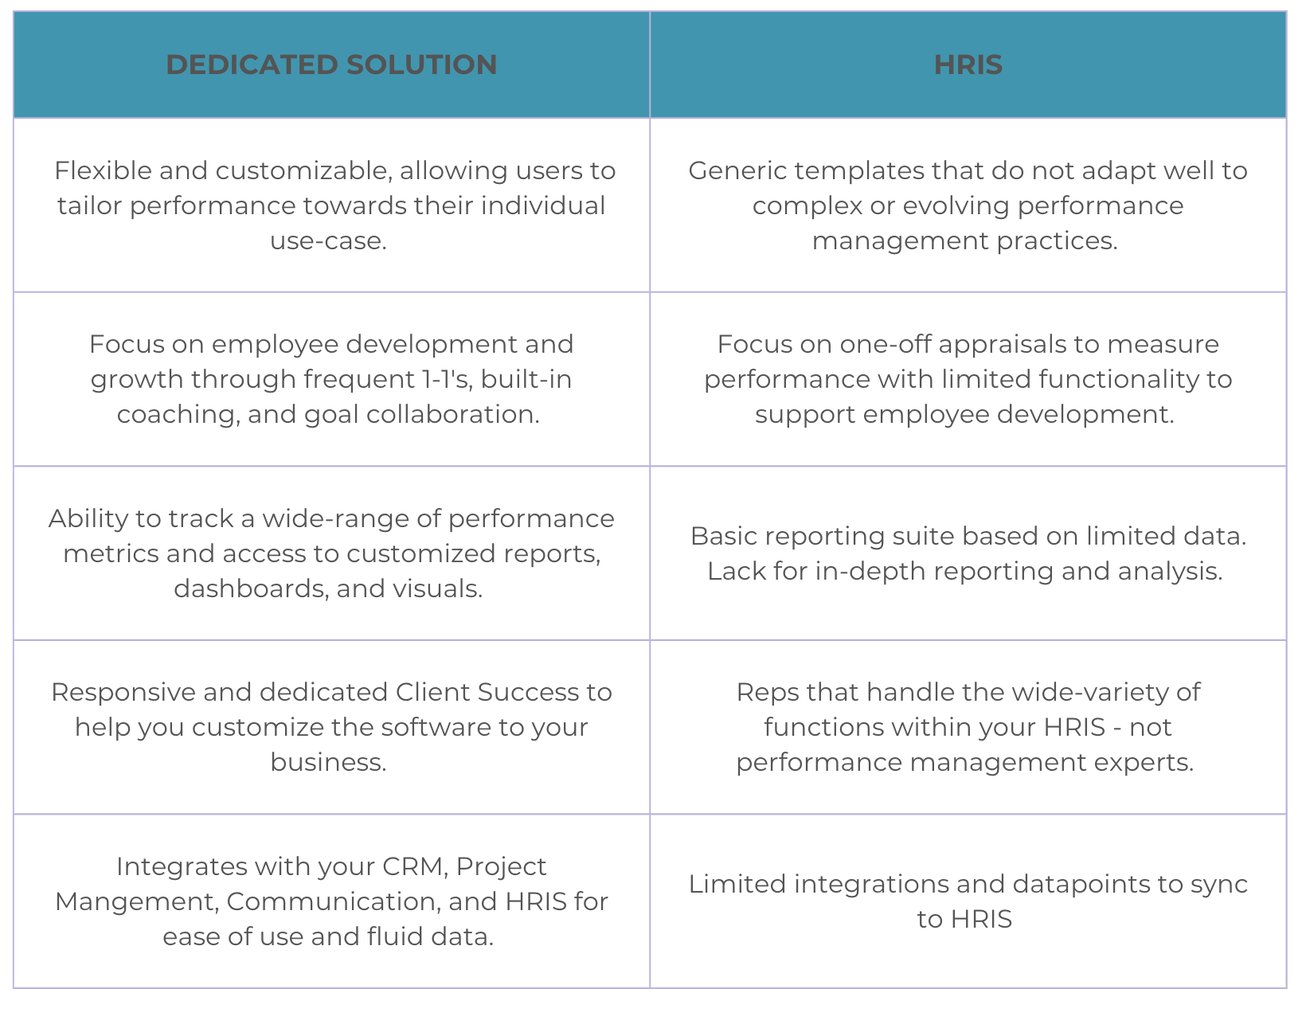 Elevate Employee Performance: 4 Reasons Dedicated Solutions Outperform HRIS